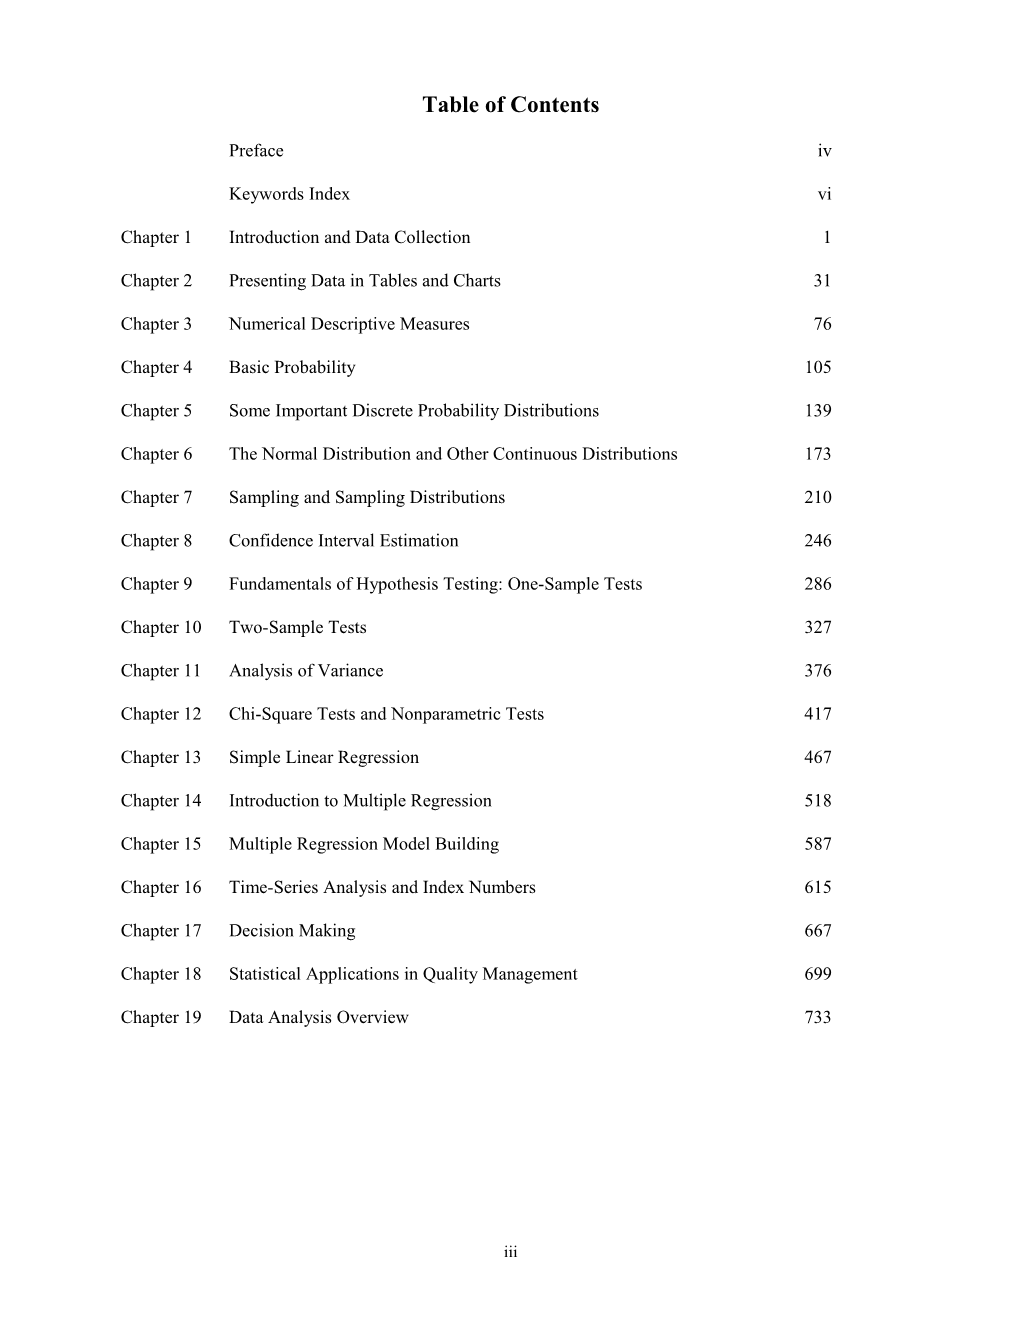 Table of Contents s471